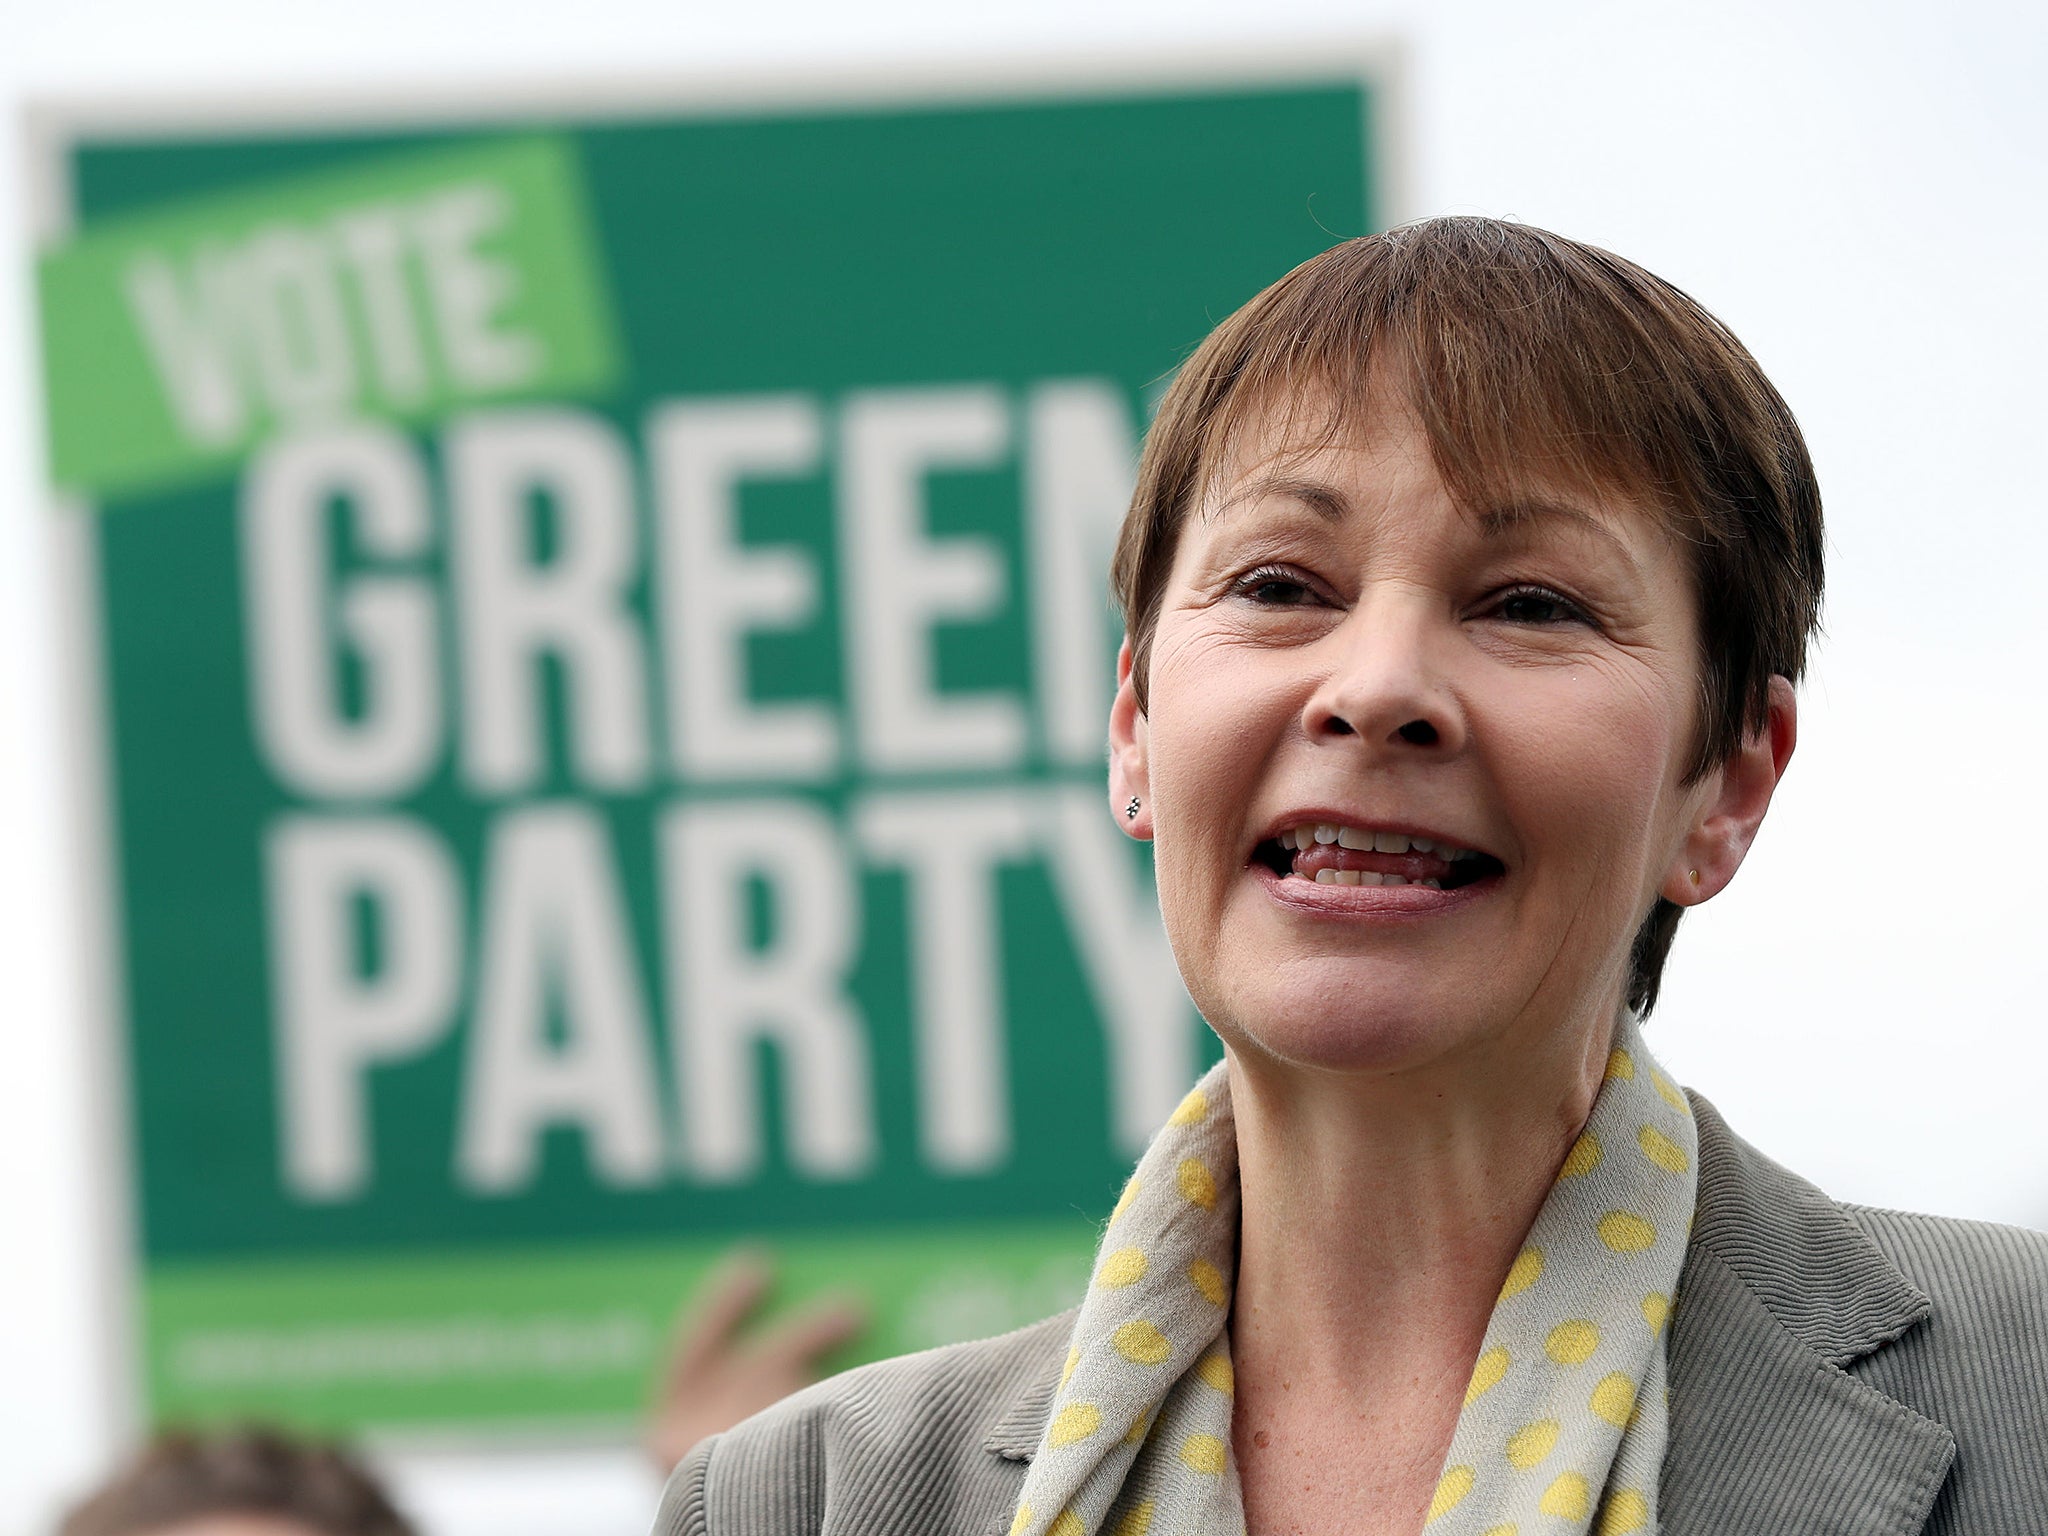 The Green Party are offering a referendum on the final Brexit deal